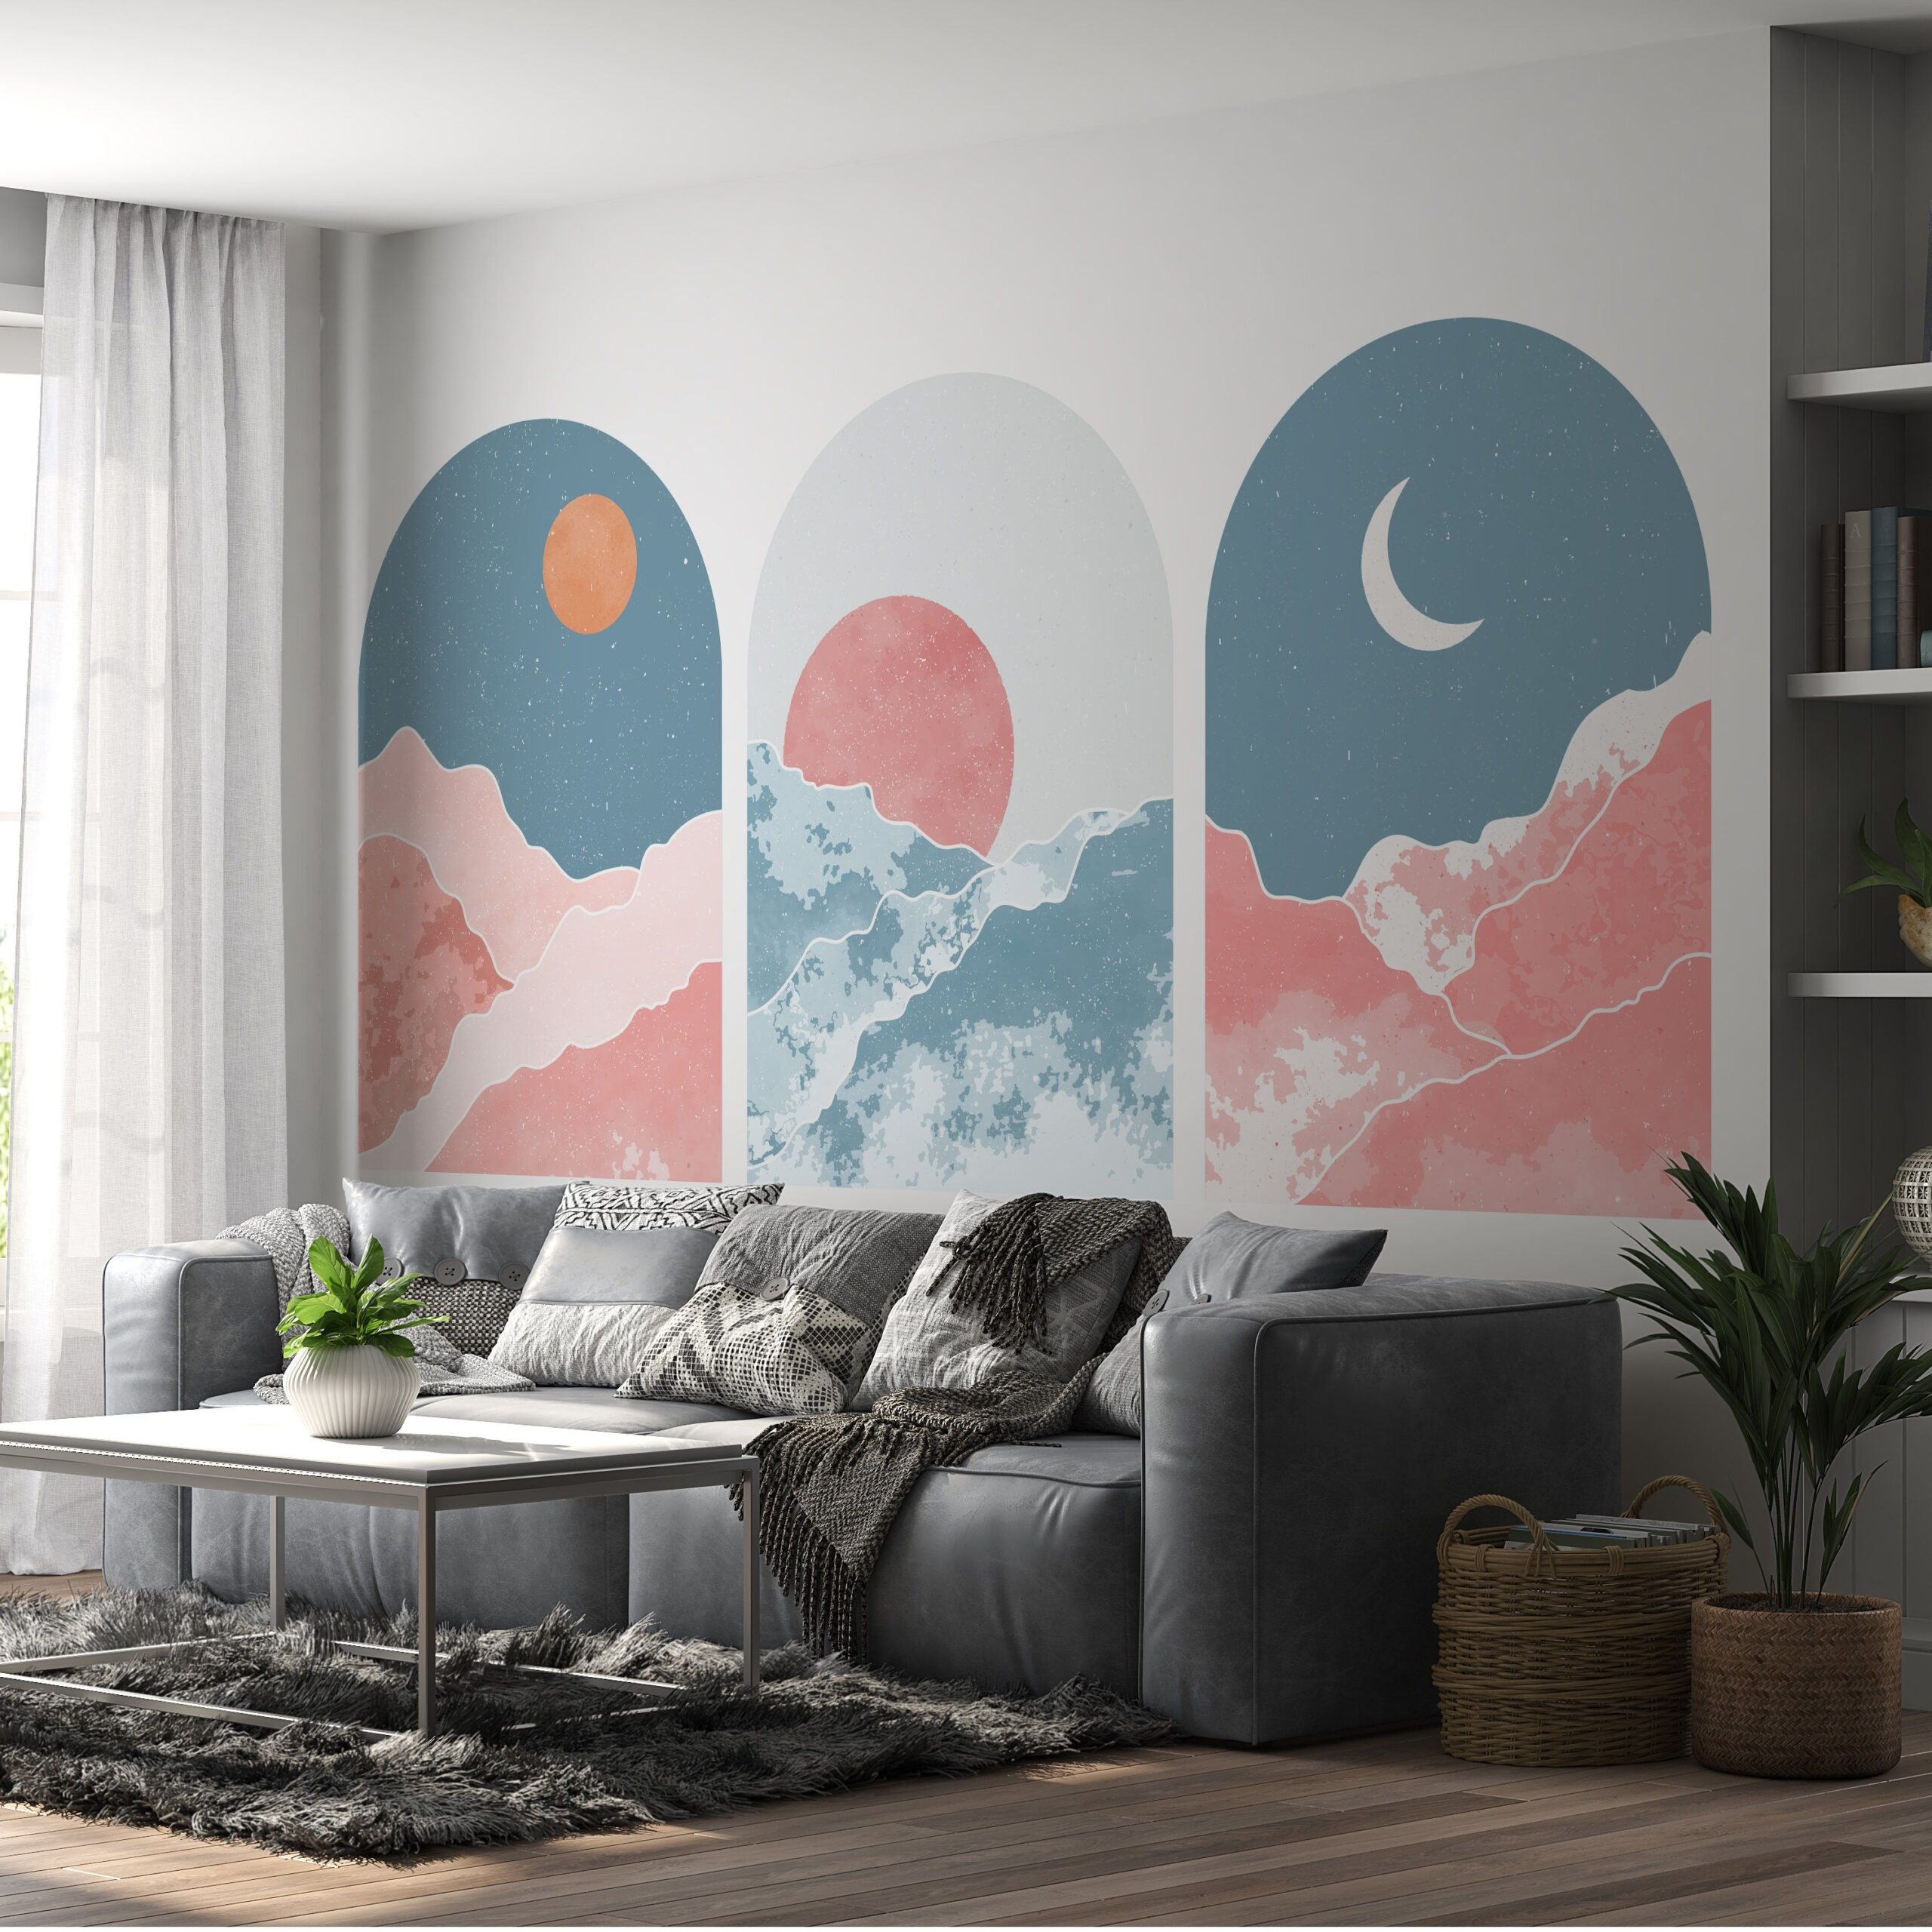 Affordably decoration with custom wall
decals